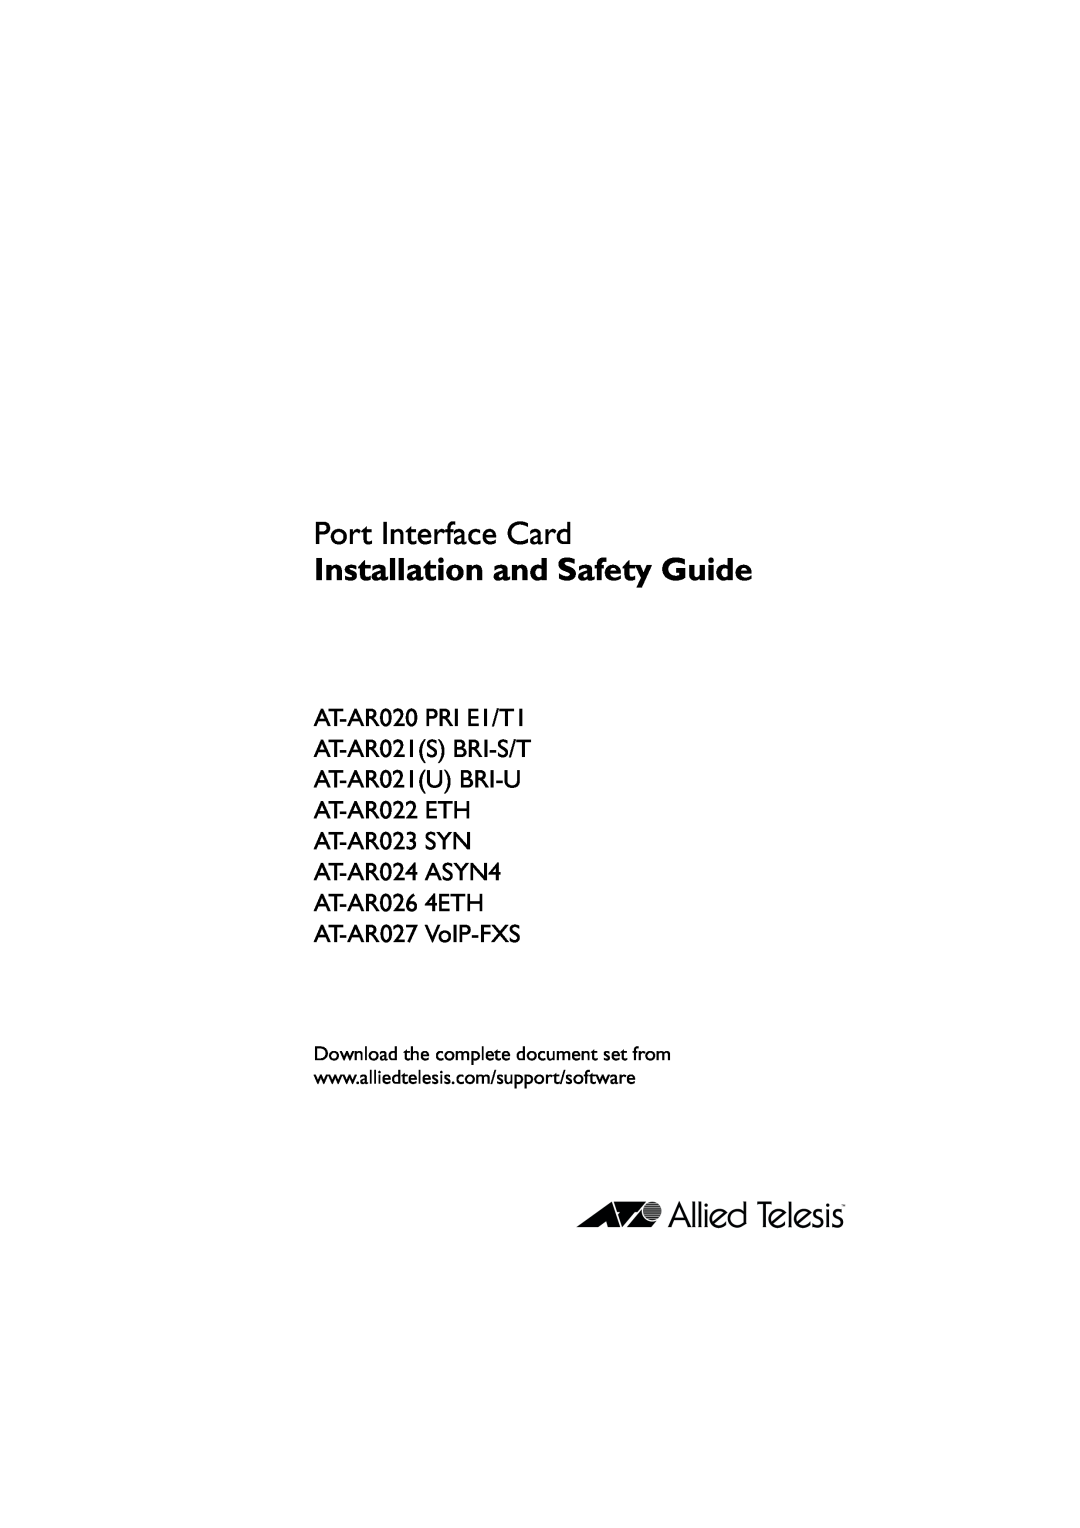 Allied Telesis AT-AR021 (S)BRI-S/I, AT-AR020 PRI EI/TI, AT-AR027VOLP-FXS Port Interface Card, Installation and Safety Guide 